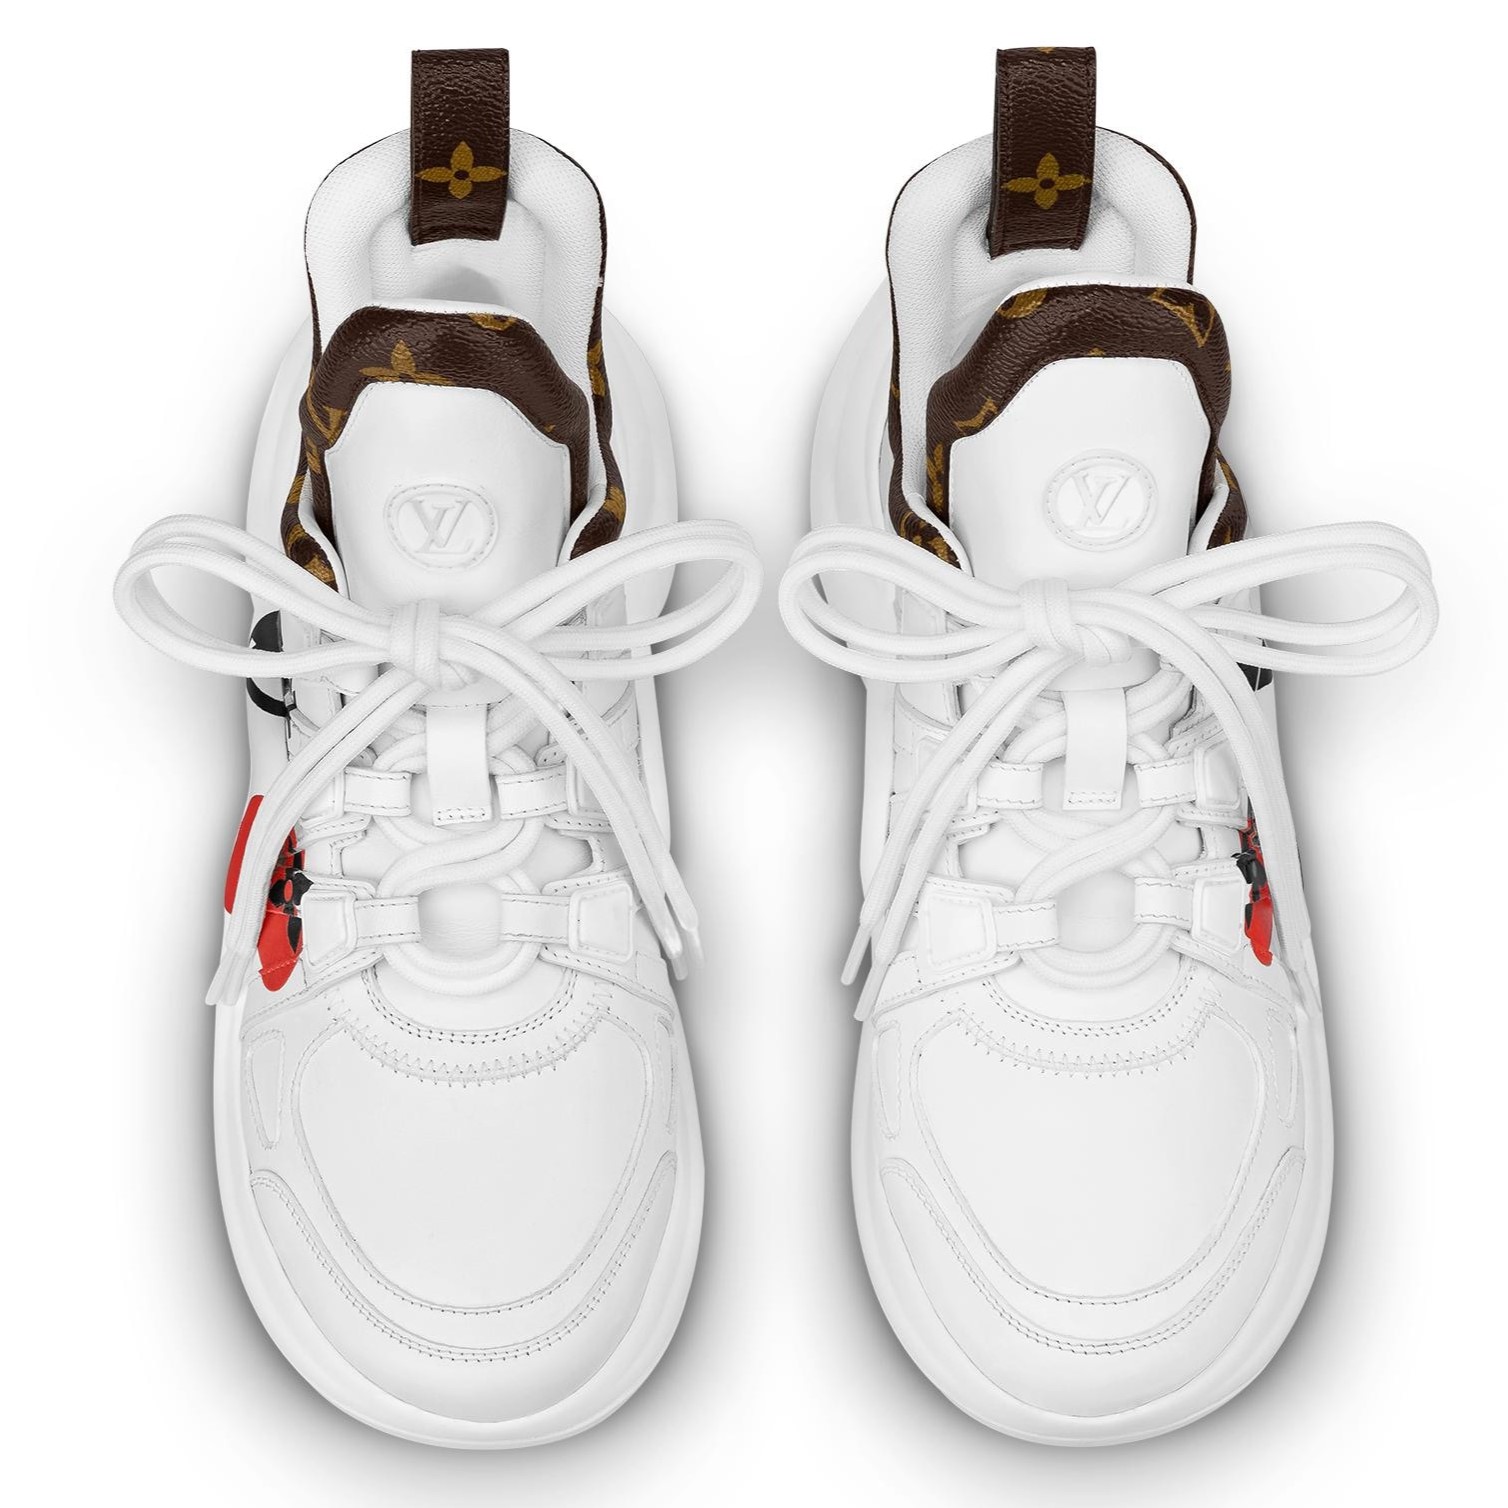 GIÀY THỂ THAO ĐẾ CONG LV NỮ LOUIS VUITTON GAME ON LV ARCHLIGHT SNEAKER IN WHITE 1A8MRP 3